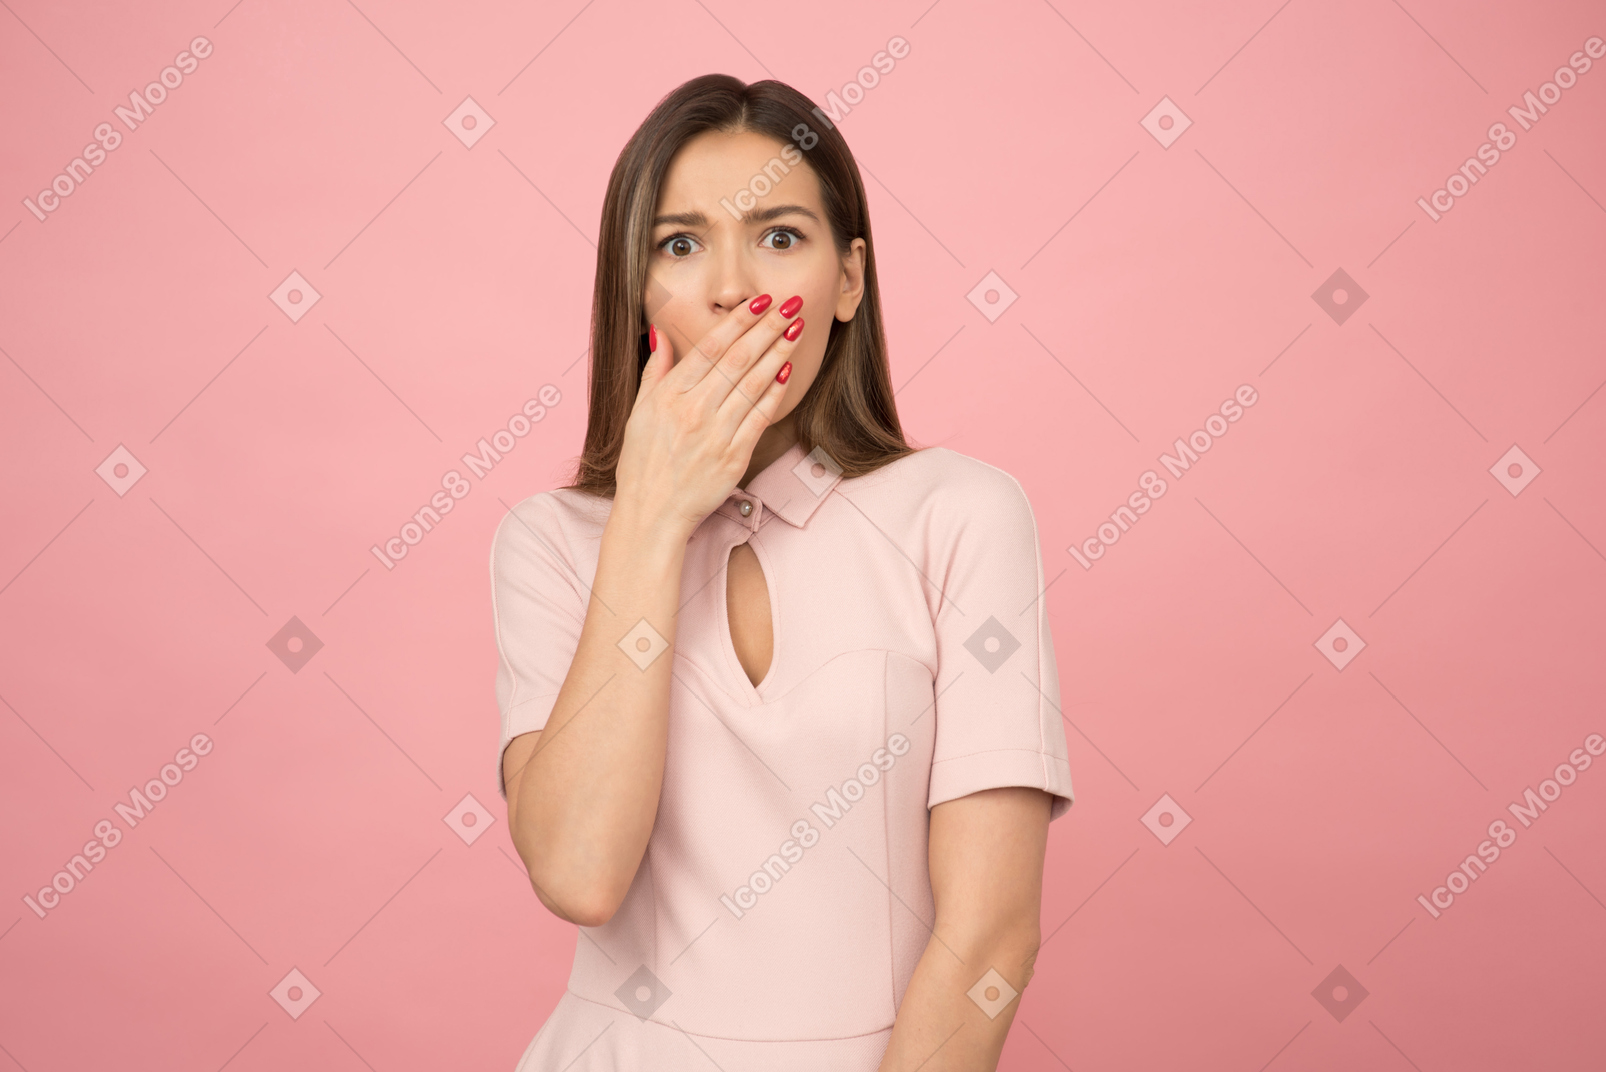 Girl with expression of shock on her face, holding her wrist next to her mouth